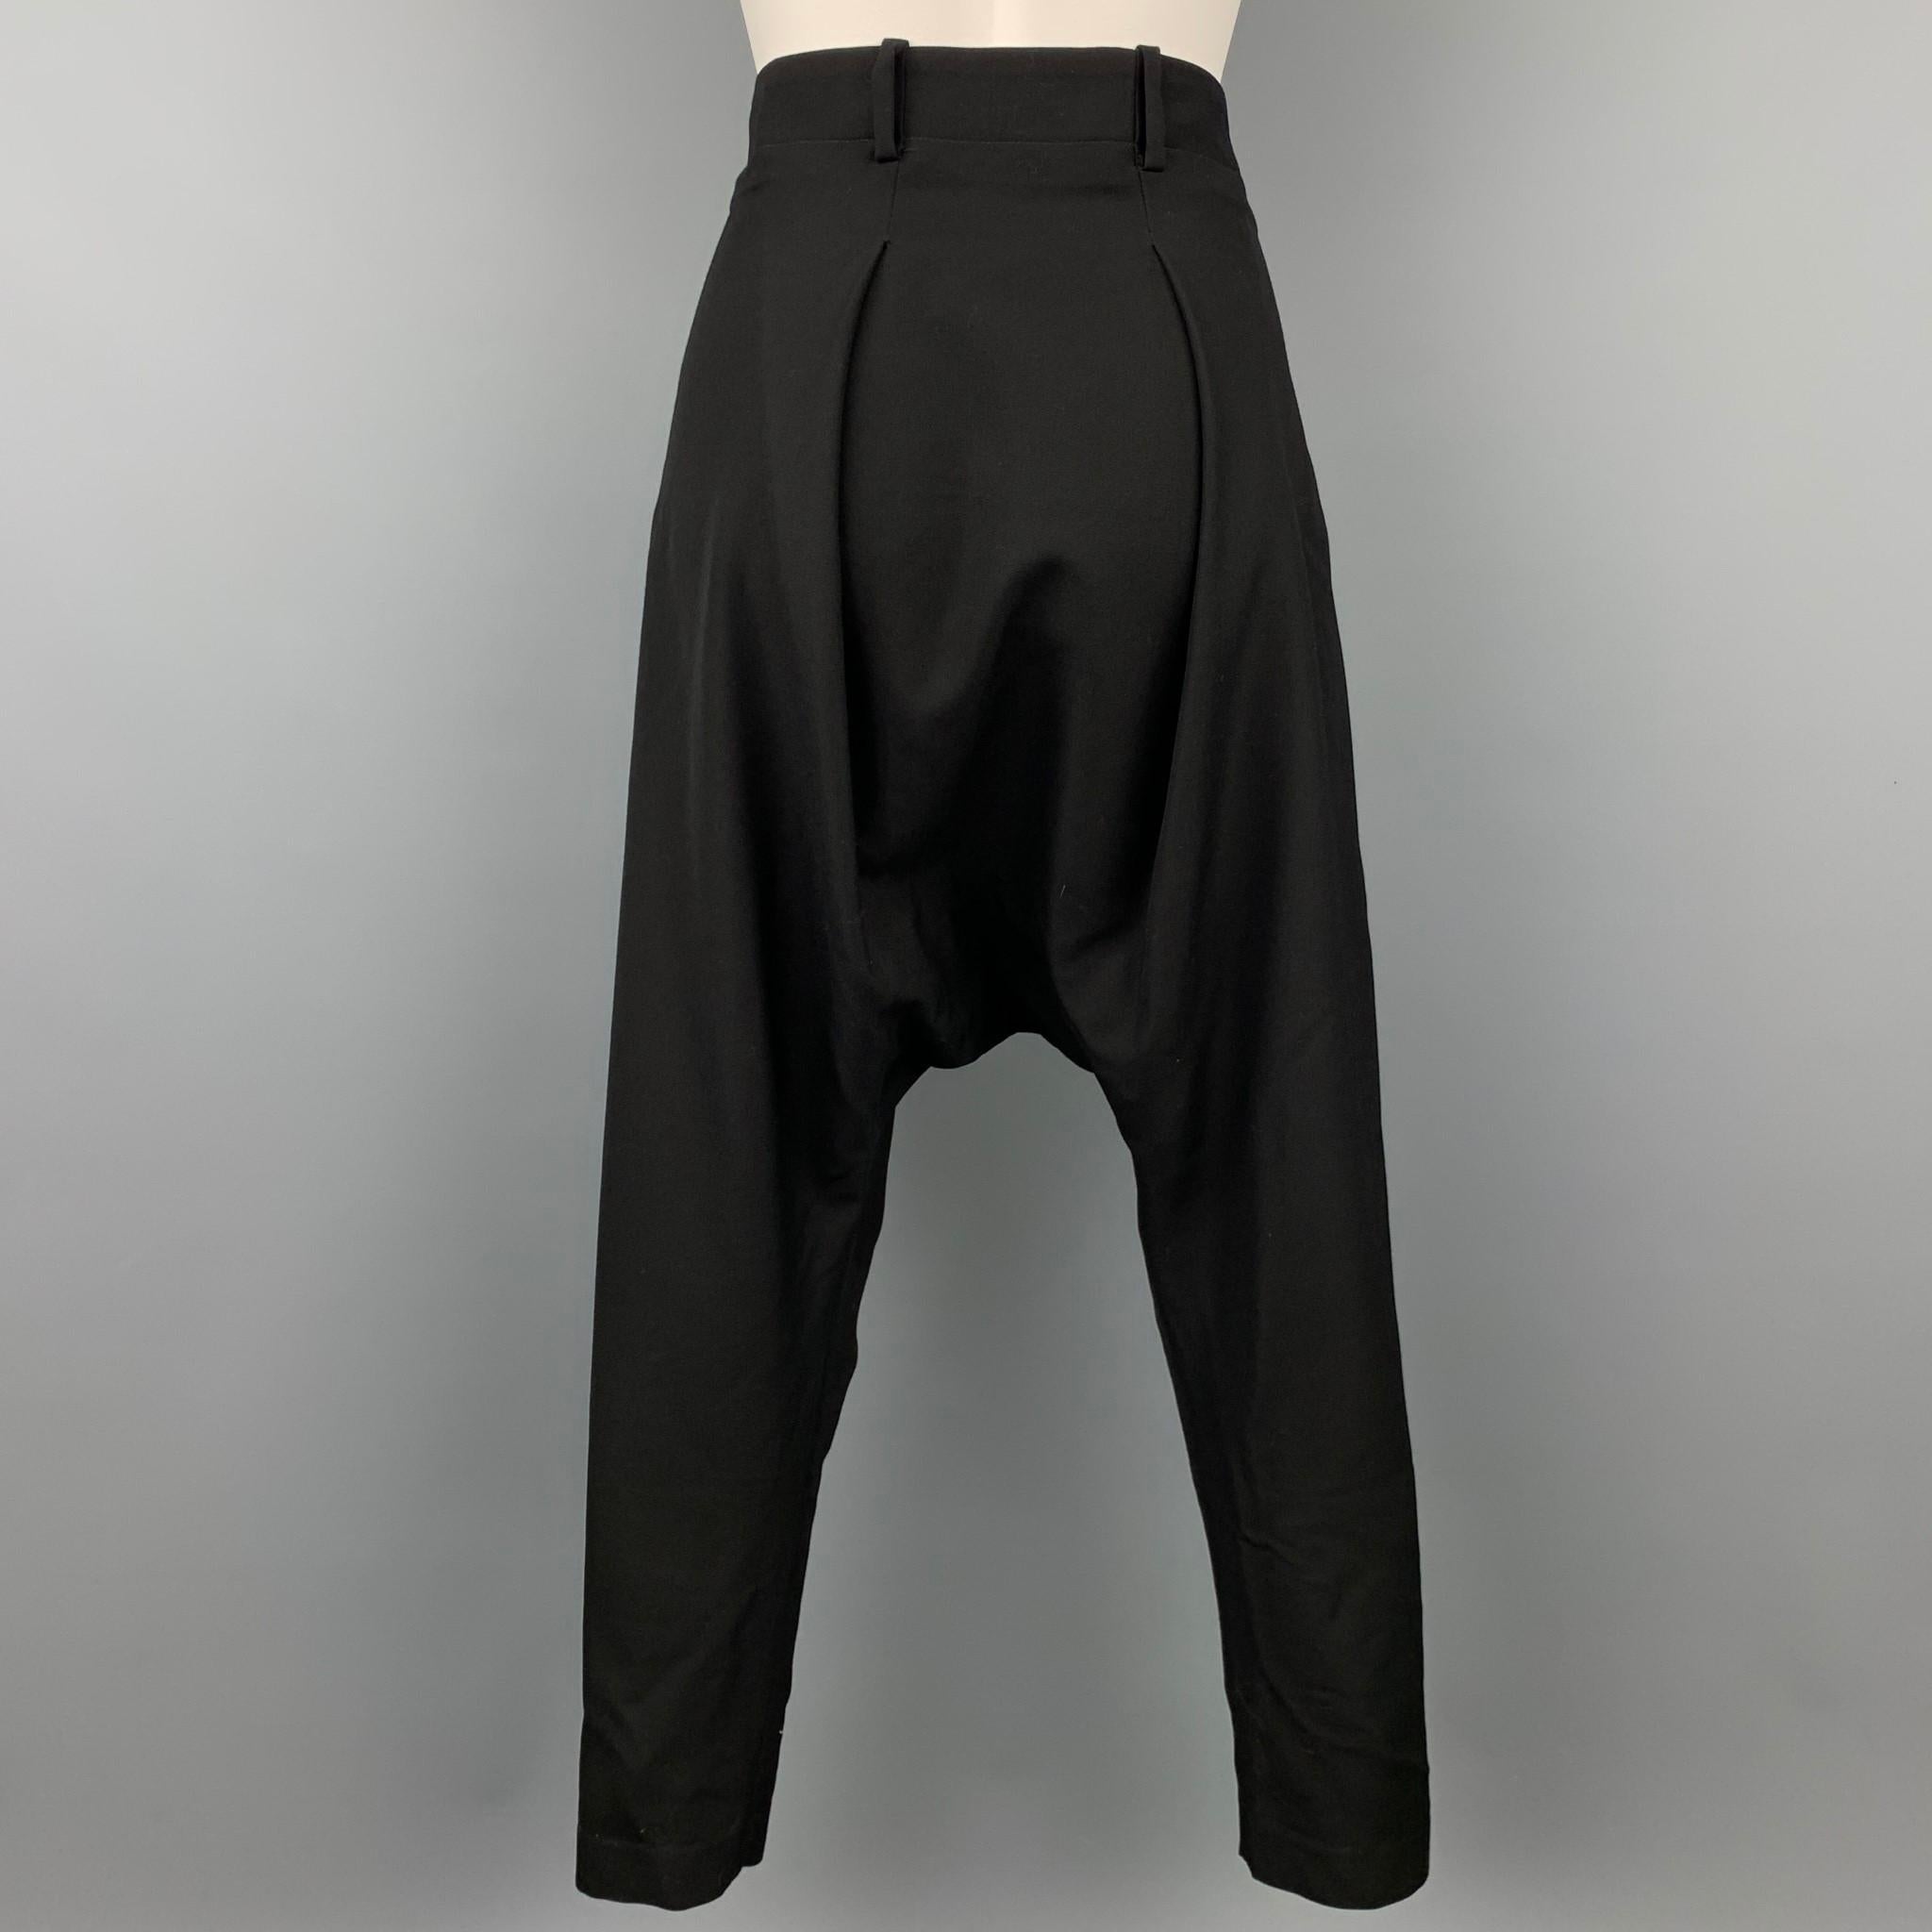 NOIR KEI NINOMIYA for COMME des GARCONS Size S Black Wool Dress Pants In Good Condition In San Francisco, CA